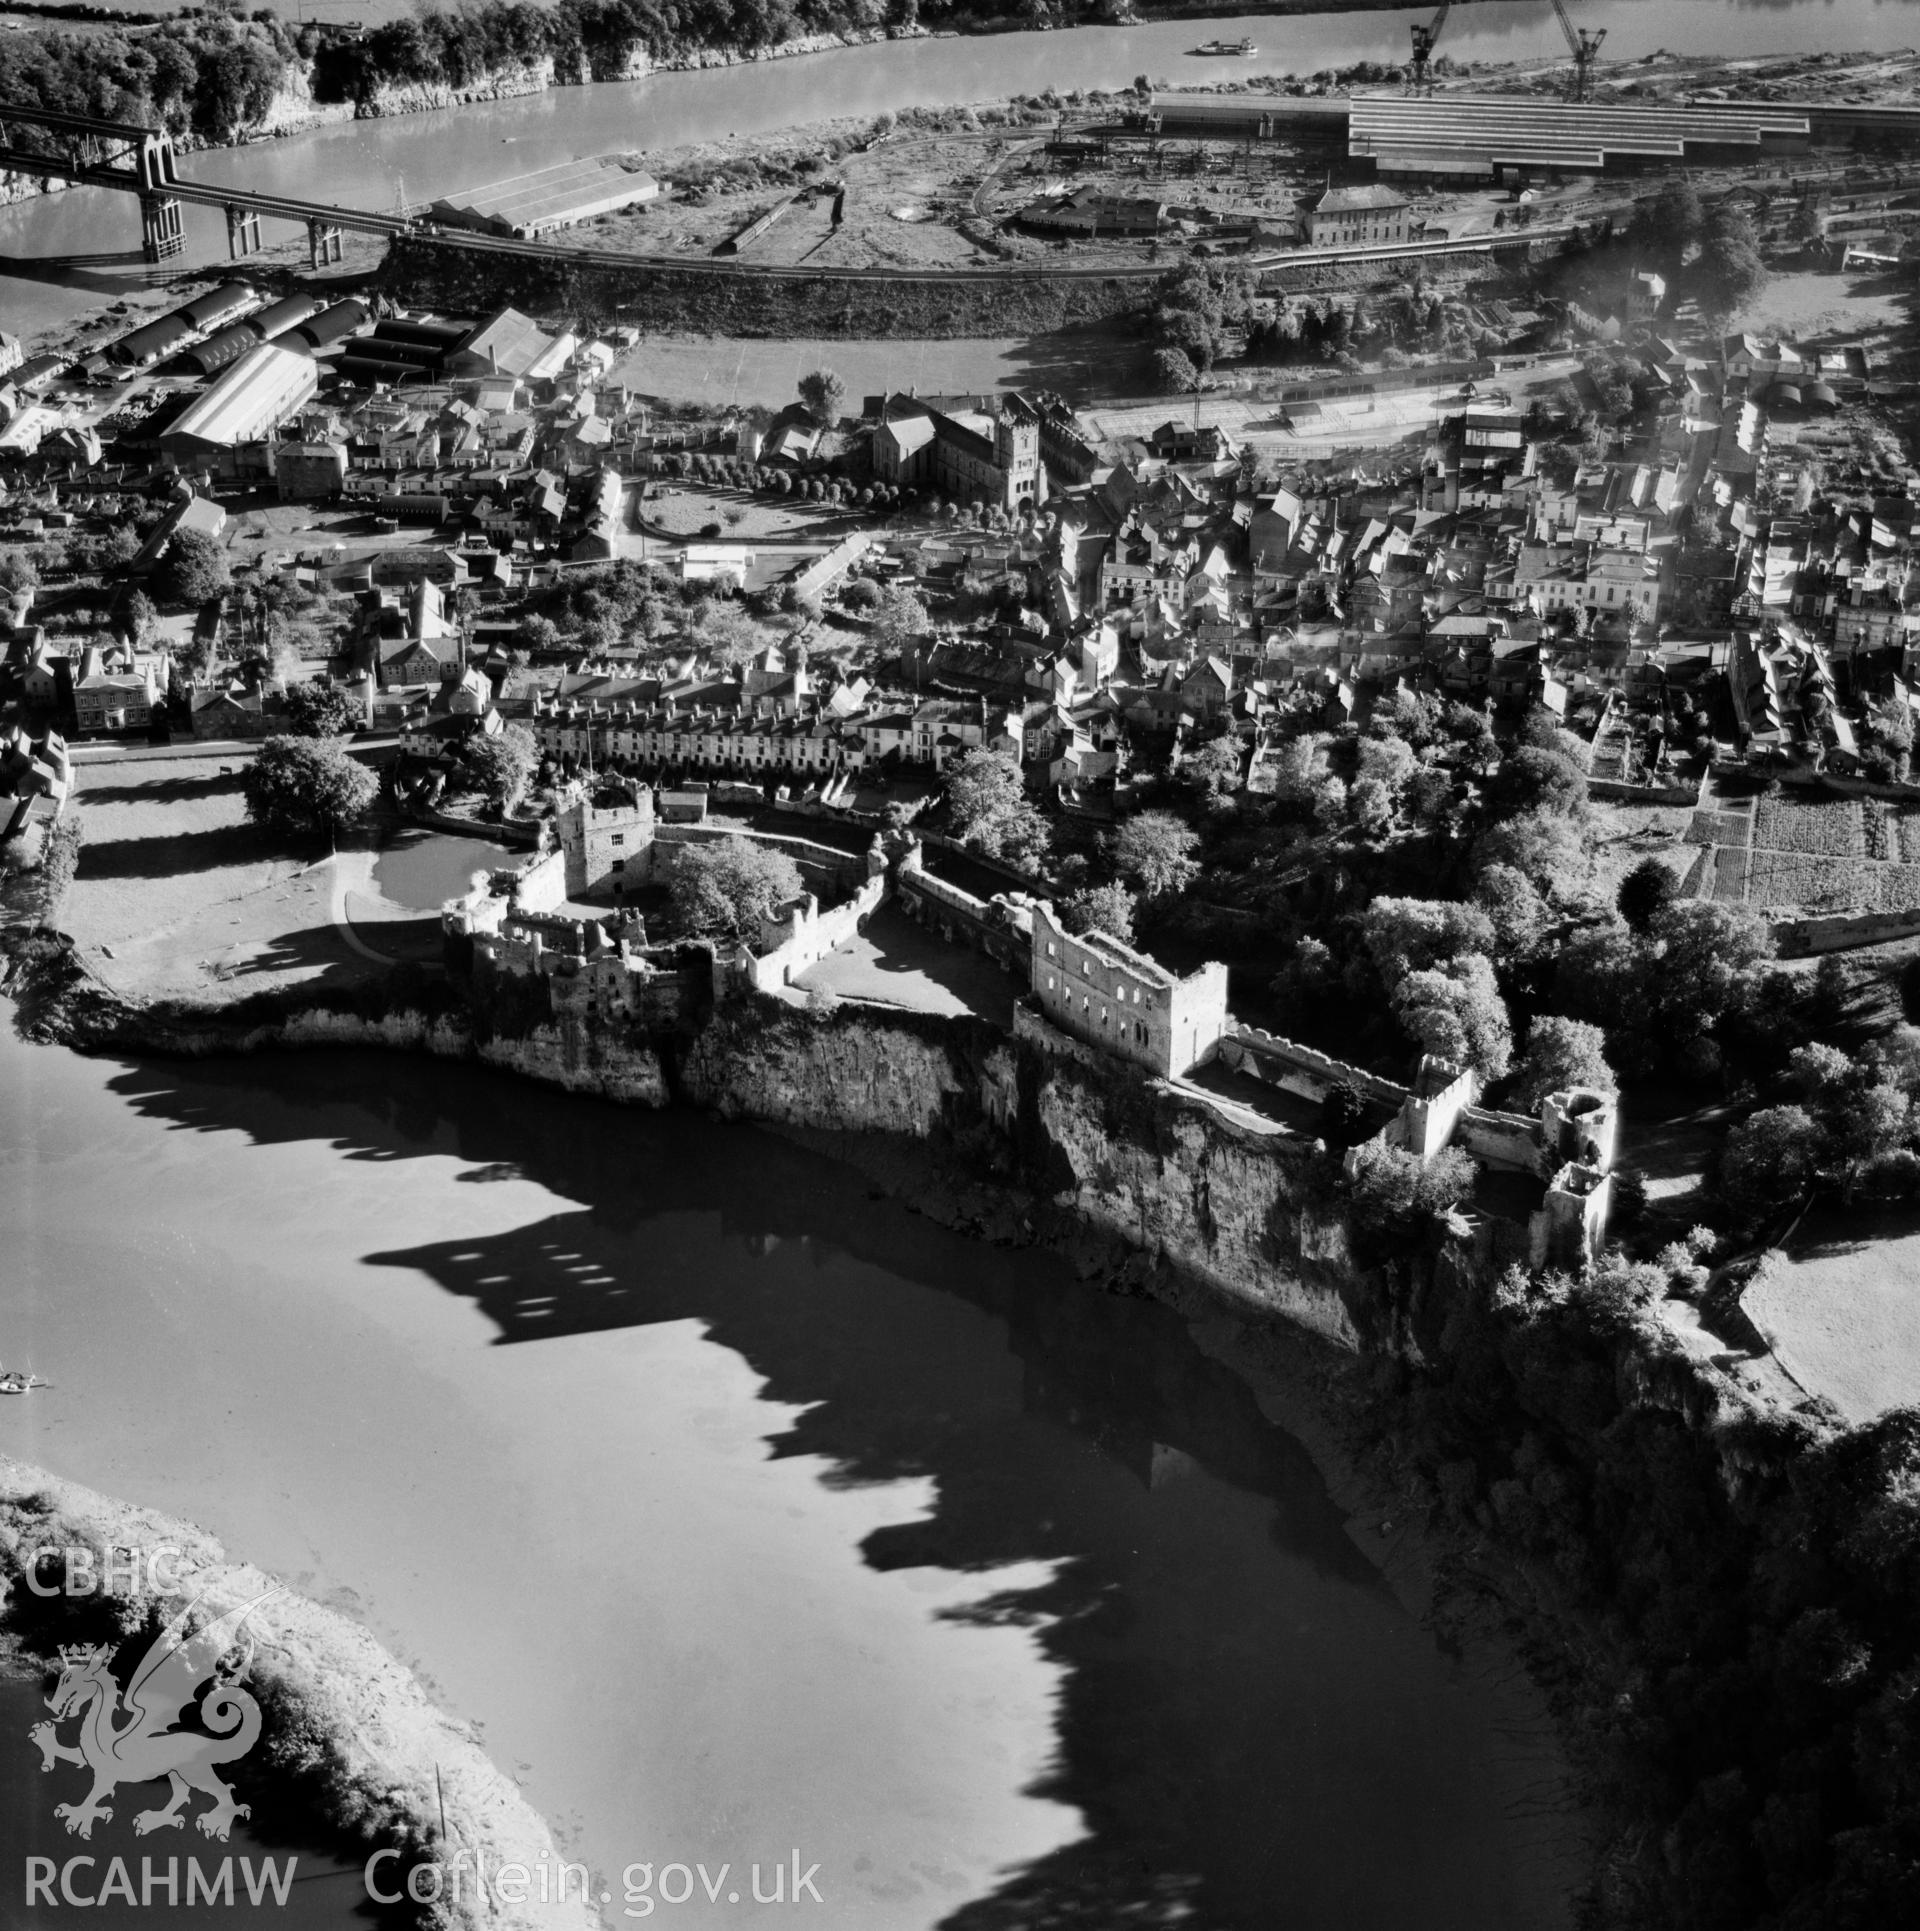 View of Chepstow showing castle. Oblique aerial photograph, 5?" cut roll film.